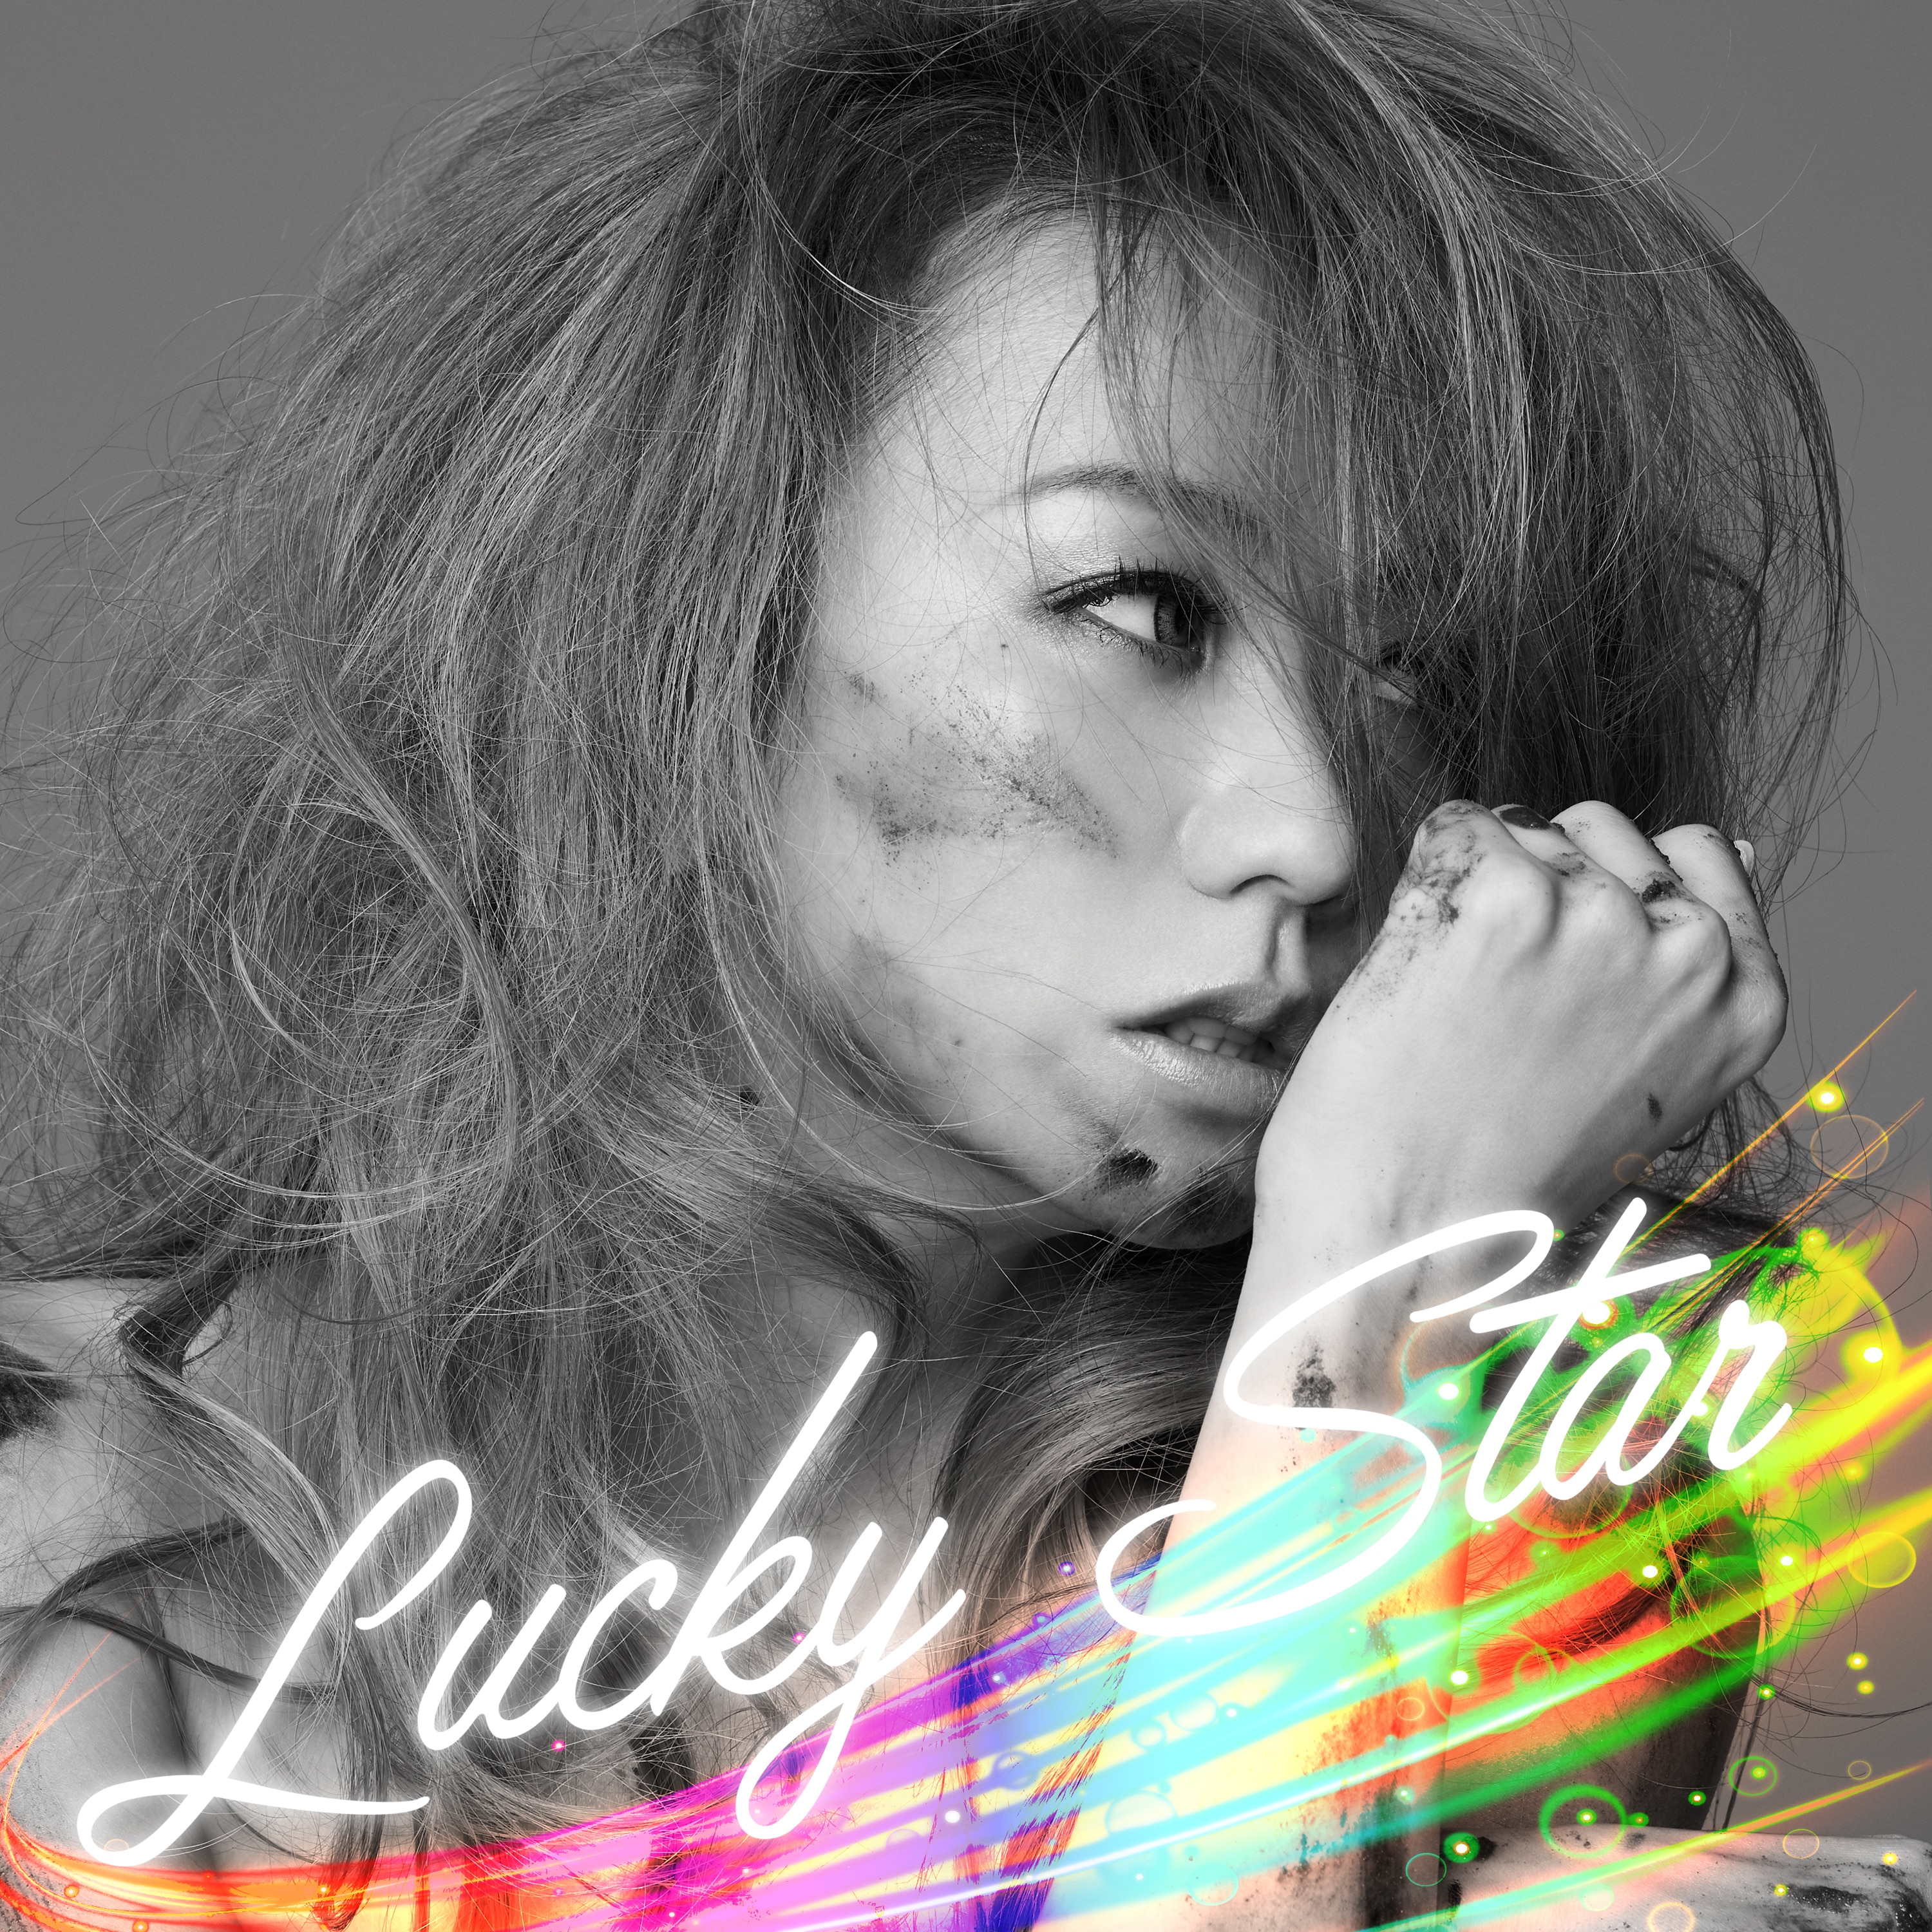 Lucky Star - DISCOGRAPHY | 倖田來未（こうだくみ）OFFICIAL WEBSITE